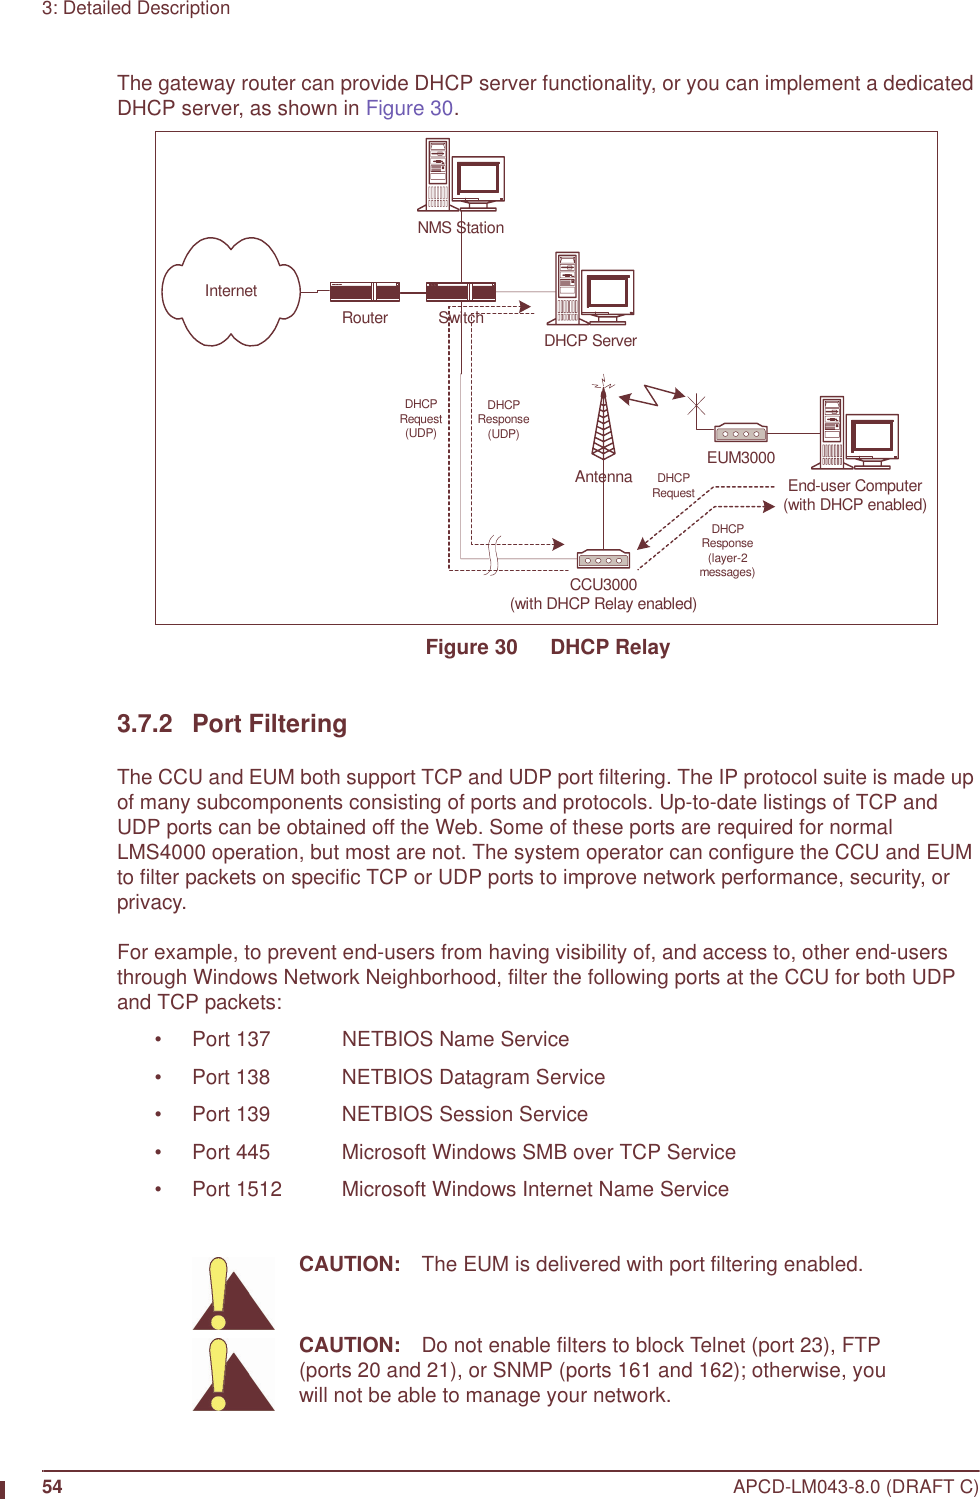 54 APCD-LM043-8.0 (DRAFT C)3: Detailed DescriptionThe gateway router can provide DHCP server functionality, or you can implement a dedicated DHCP server, as shown in Figure 30.Figure 30   DHCP Relay3.7.2 Port FilteringThe CCU and EUM both support TCP and UDP port filtering. The IP protocol suite is made up of many subcomponents consisting of ports and protocols. Up-to-date listings of TCP and UDP ports can be obtained off the Web. Some of these ports are required for normal LMS4000 operation, but most are not. The system operator can configure the CCU and EUM to filter packets on specific TCP or UDP ports to improve network performance, security, or privacy.For example, to prevent end-users from having visibility of, and access to, other end-users through Windows Network Neighborhood, filter the following ports at the CCU for both UDP and TCP packets:• Port 137 NETBIOS Name Service• Port 138 NETBIOS Datagram Service• Port 139 NETBIOS Session Service• Port 445 Microsoft Windows SMB over TCP Service• Port 1512 Microsoft Windows Internet Name ServiceCAUTION: The EUM is delivered with port filtering enabled.CAUTION: Do not enable filters to block Telnet (port 23), FTP (ports 20 and 21), or SNMP (ports 161 and 162); otherwise, you will not be able to manage your network.CCU3000(with DHCP Relay enabled)Antenna EUM3000NMS StationSwitchInternetEnd-user Computer(with DHCP enabled)DHCP ServerDHCPRequestDHCPResponse(layer-2messages)DHCPRequest(UDP)DHCPResponse(UDP)Router